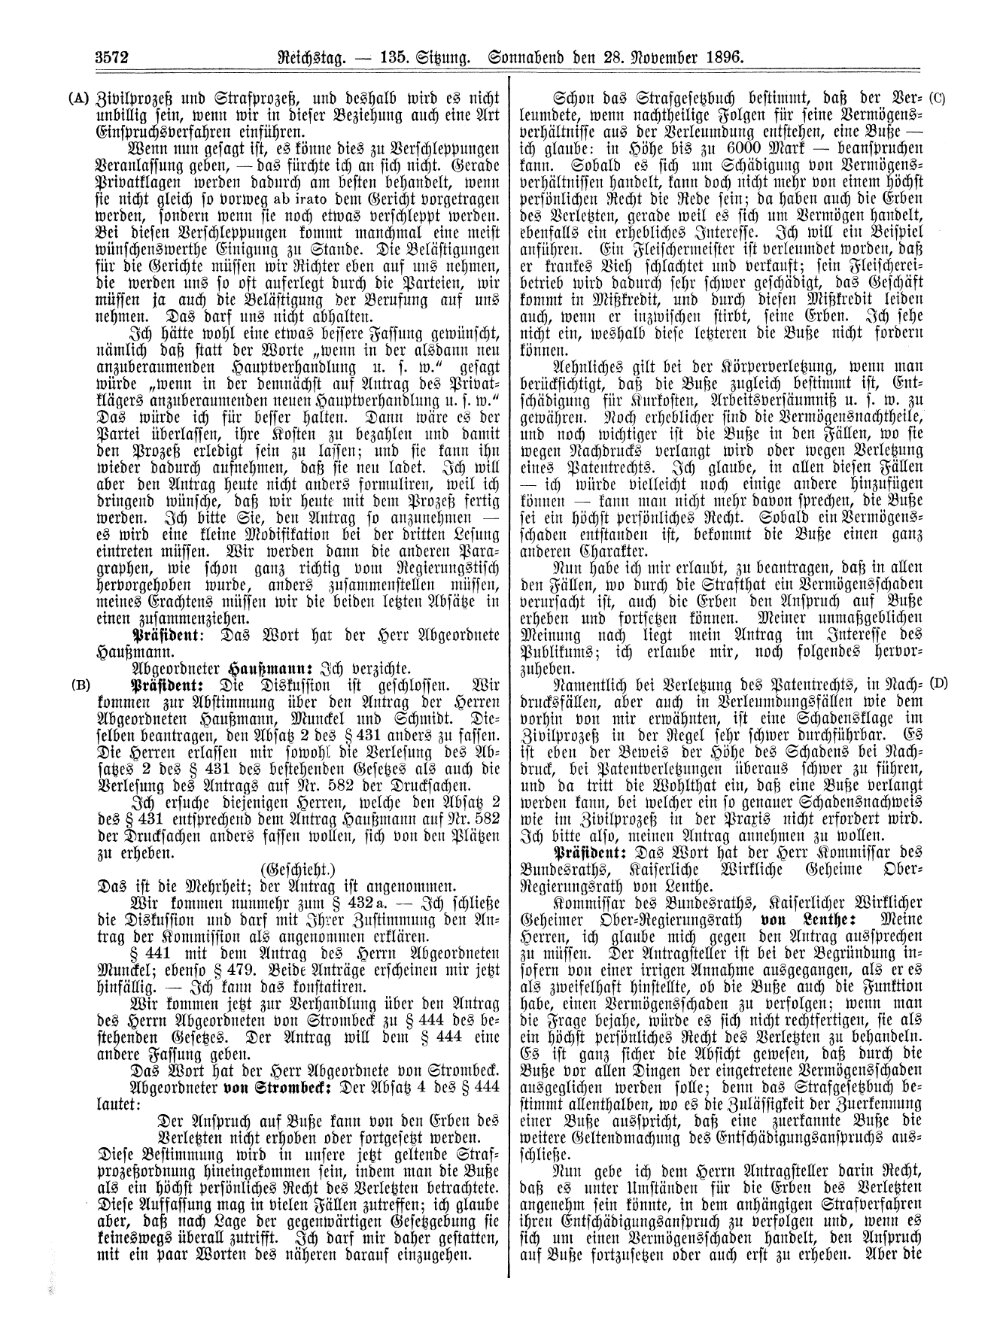 Scan of page 3572